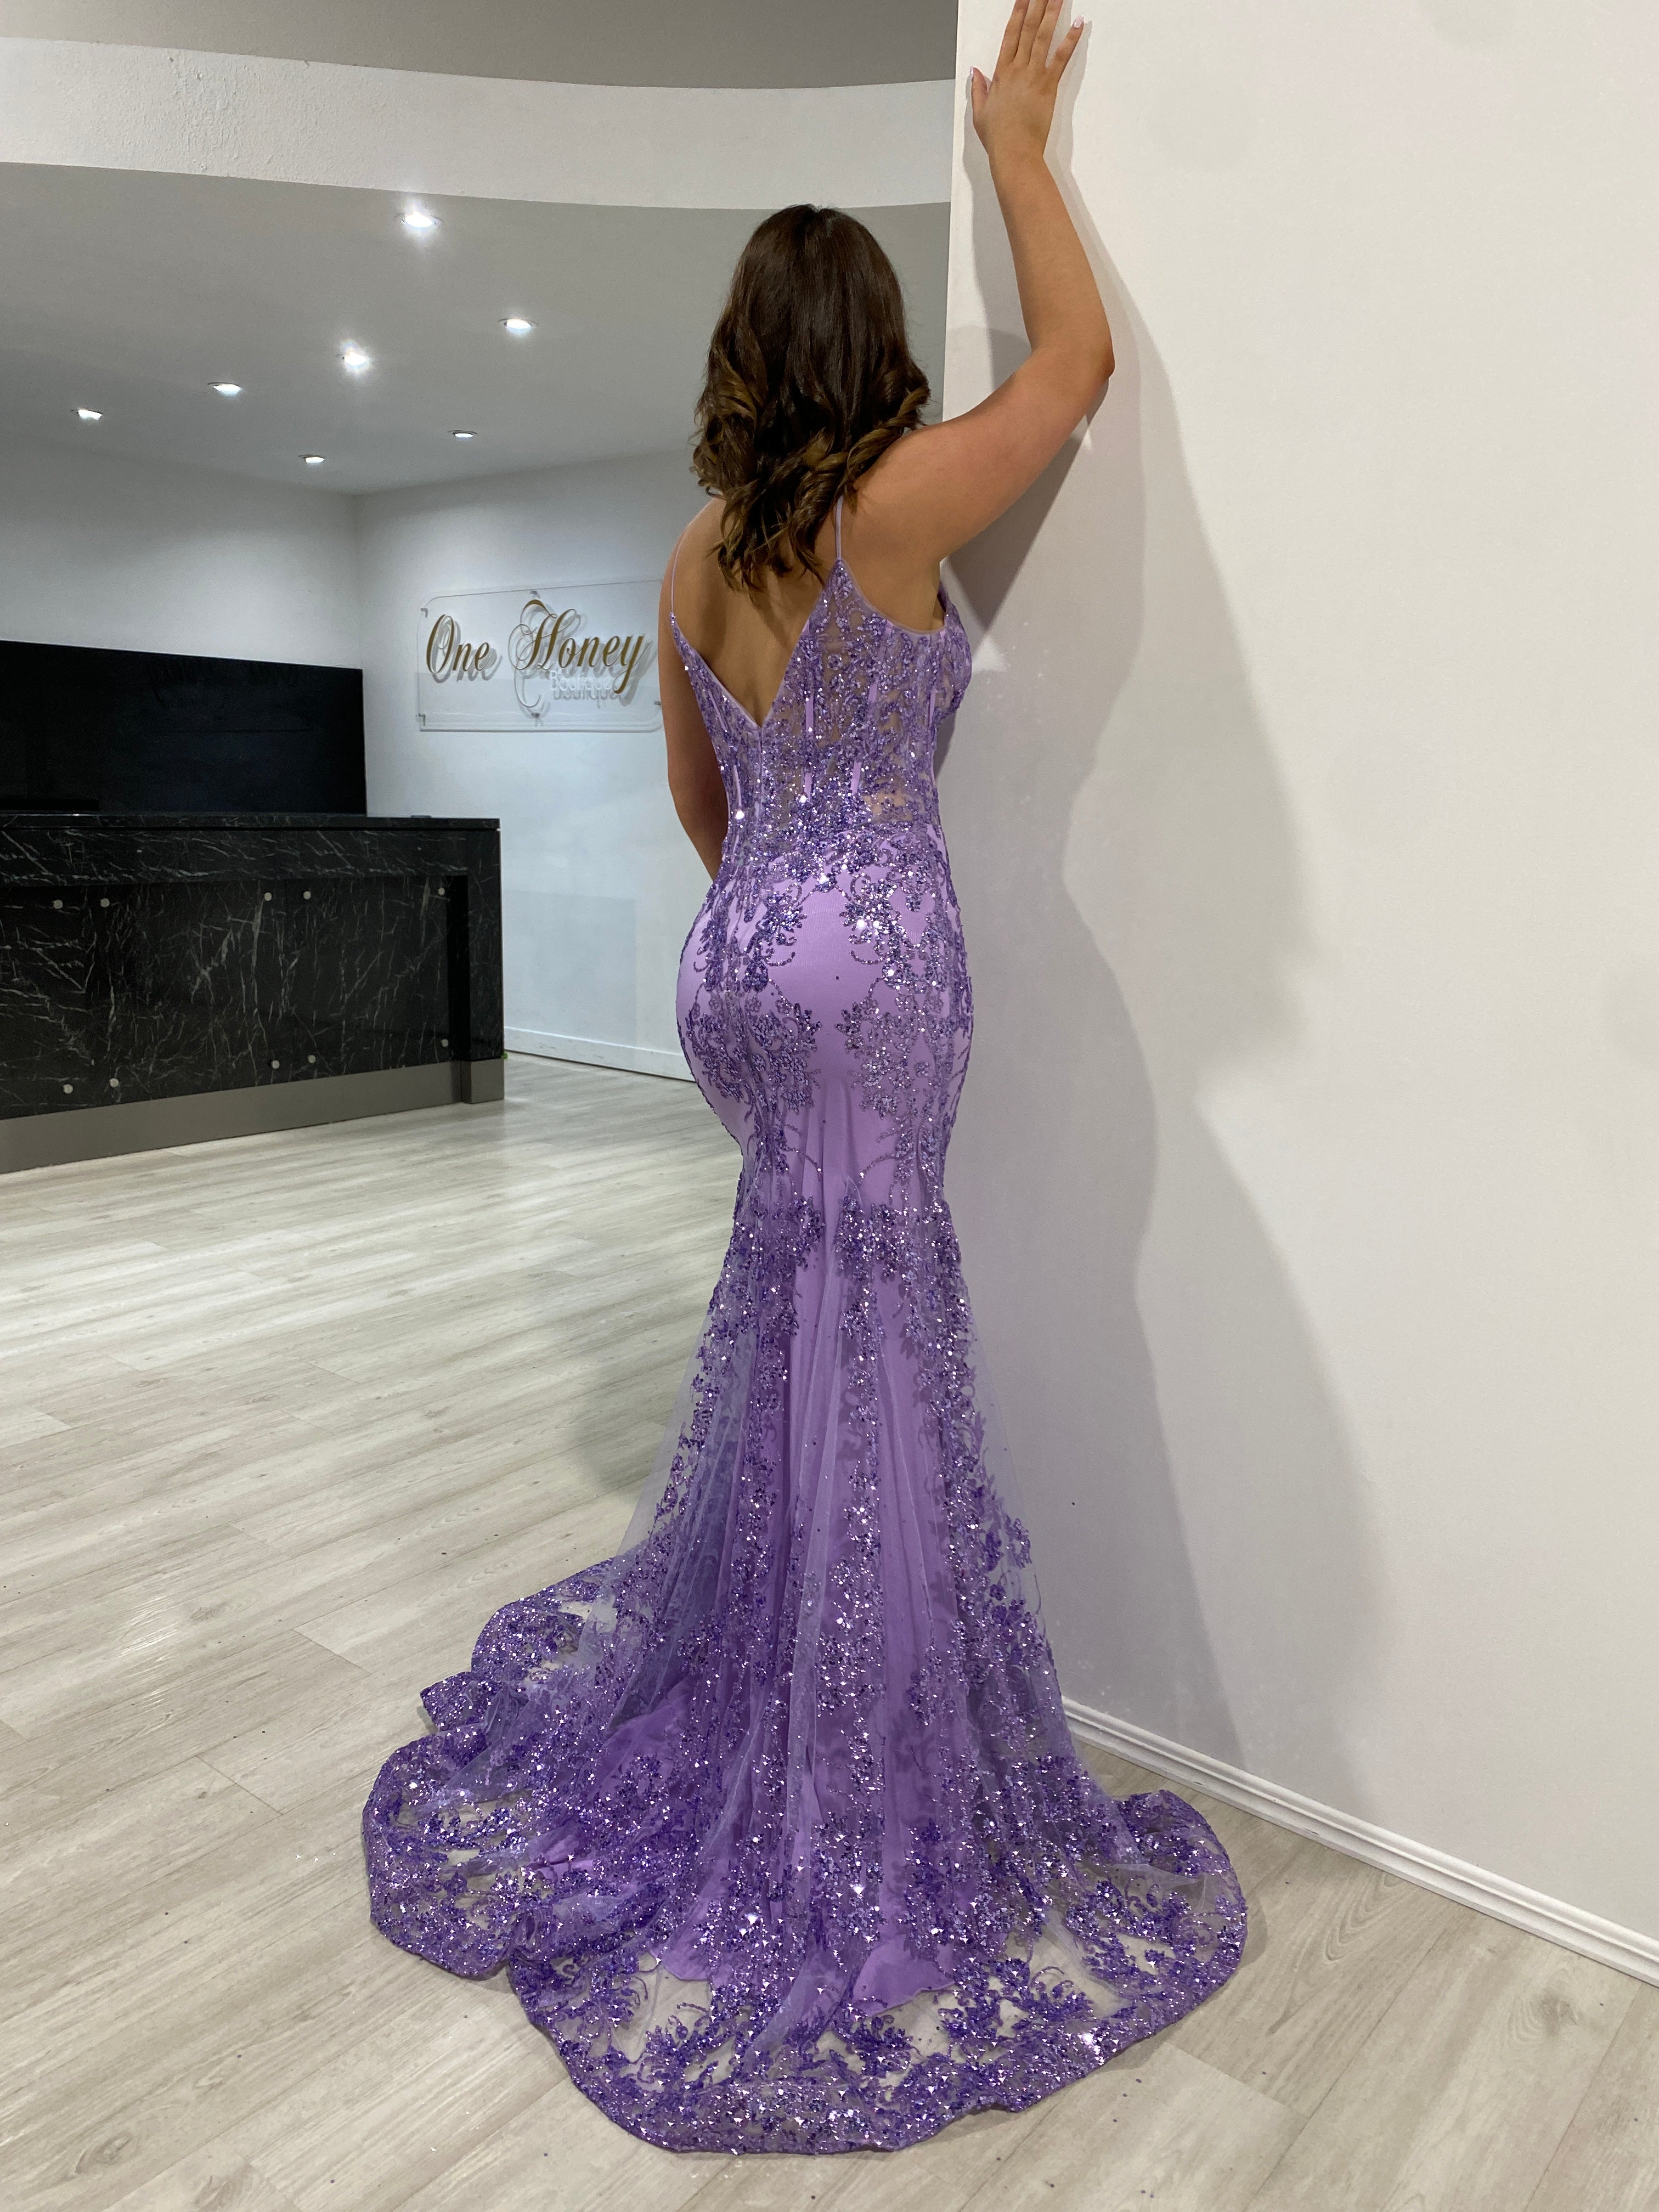 Honey Couture ARMANI Lilac Purple Sequin Corset Mermaid Formal Gown Dress